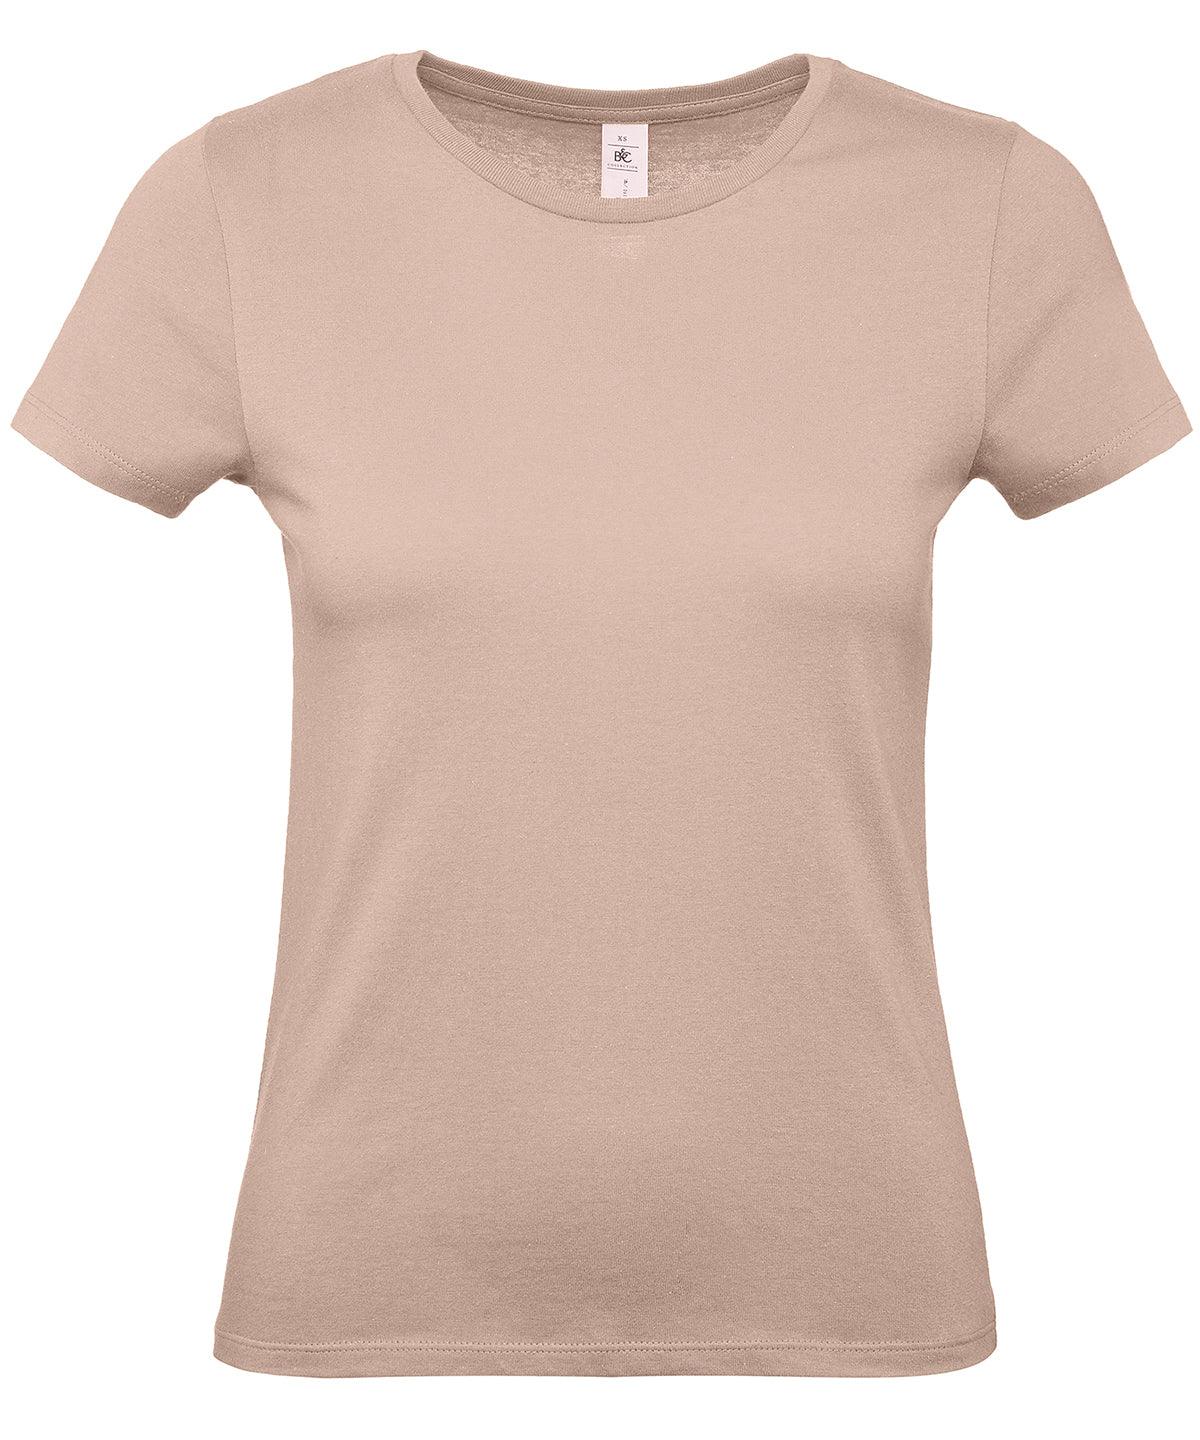 Millennial Pink - B&C #E150 /women T-Shirts B&C Collection Holiday Season, Hyperbrights and Neons, Must Haves, Plus Sizes, T-Shirts & Vests Schoolwear Centres